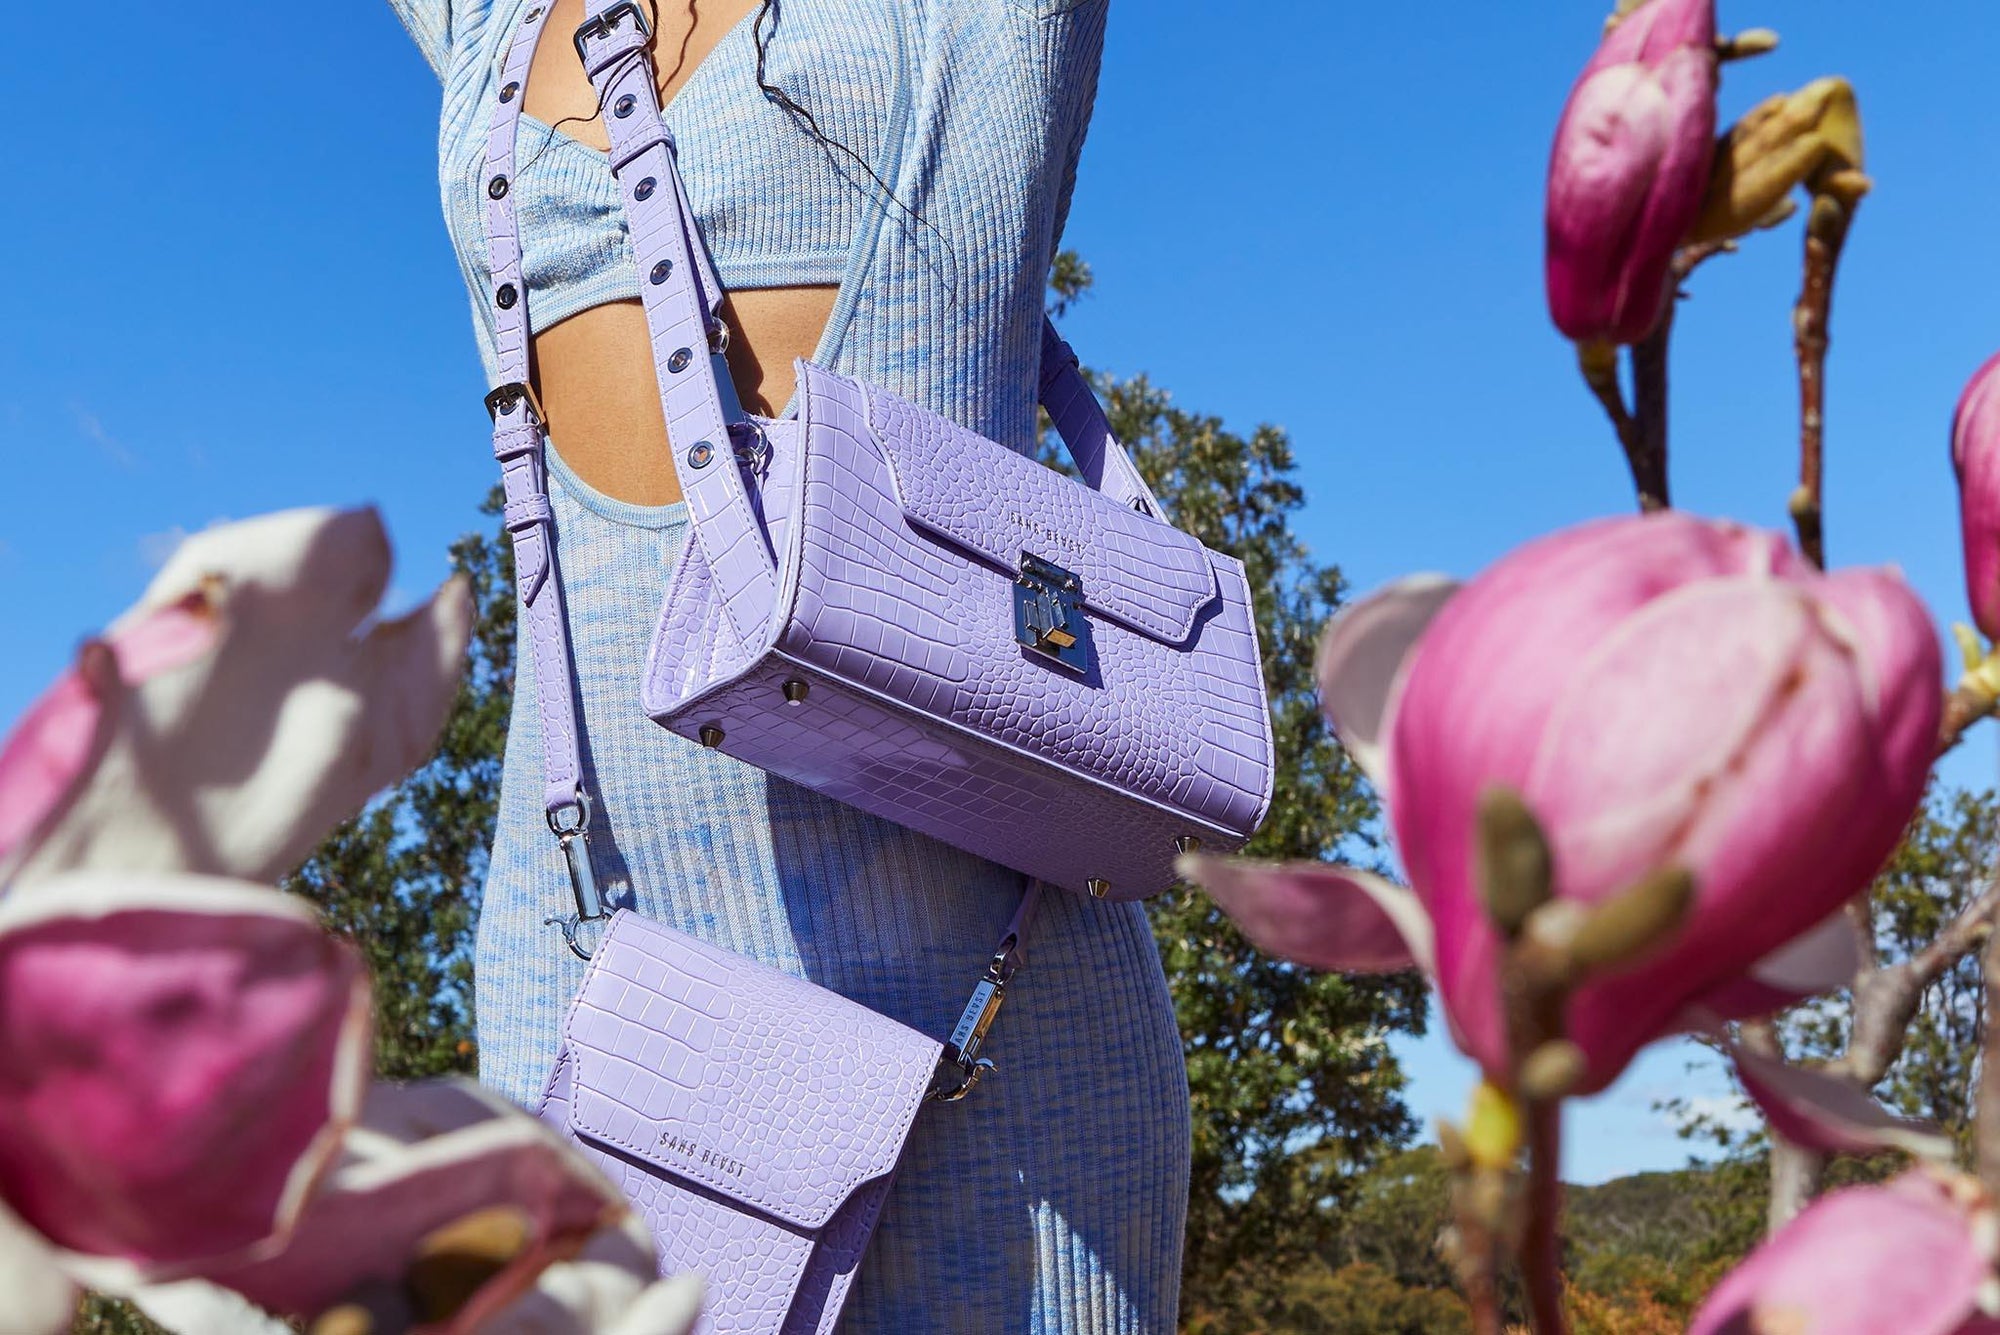 A woman wearing a light blue cutout dress and two lilac handbags reaching up to a bright blue sky.  She is surrounded by pink magnolia flowers.